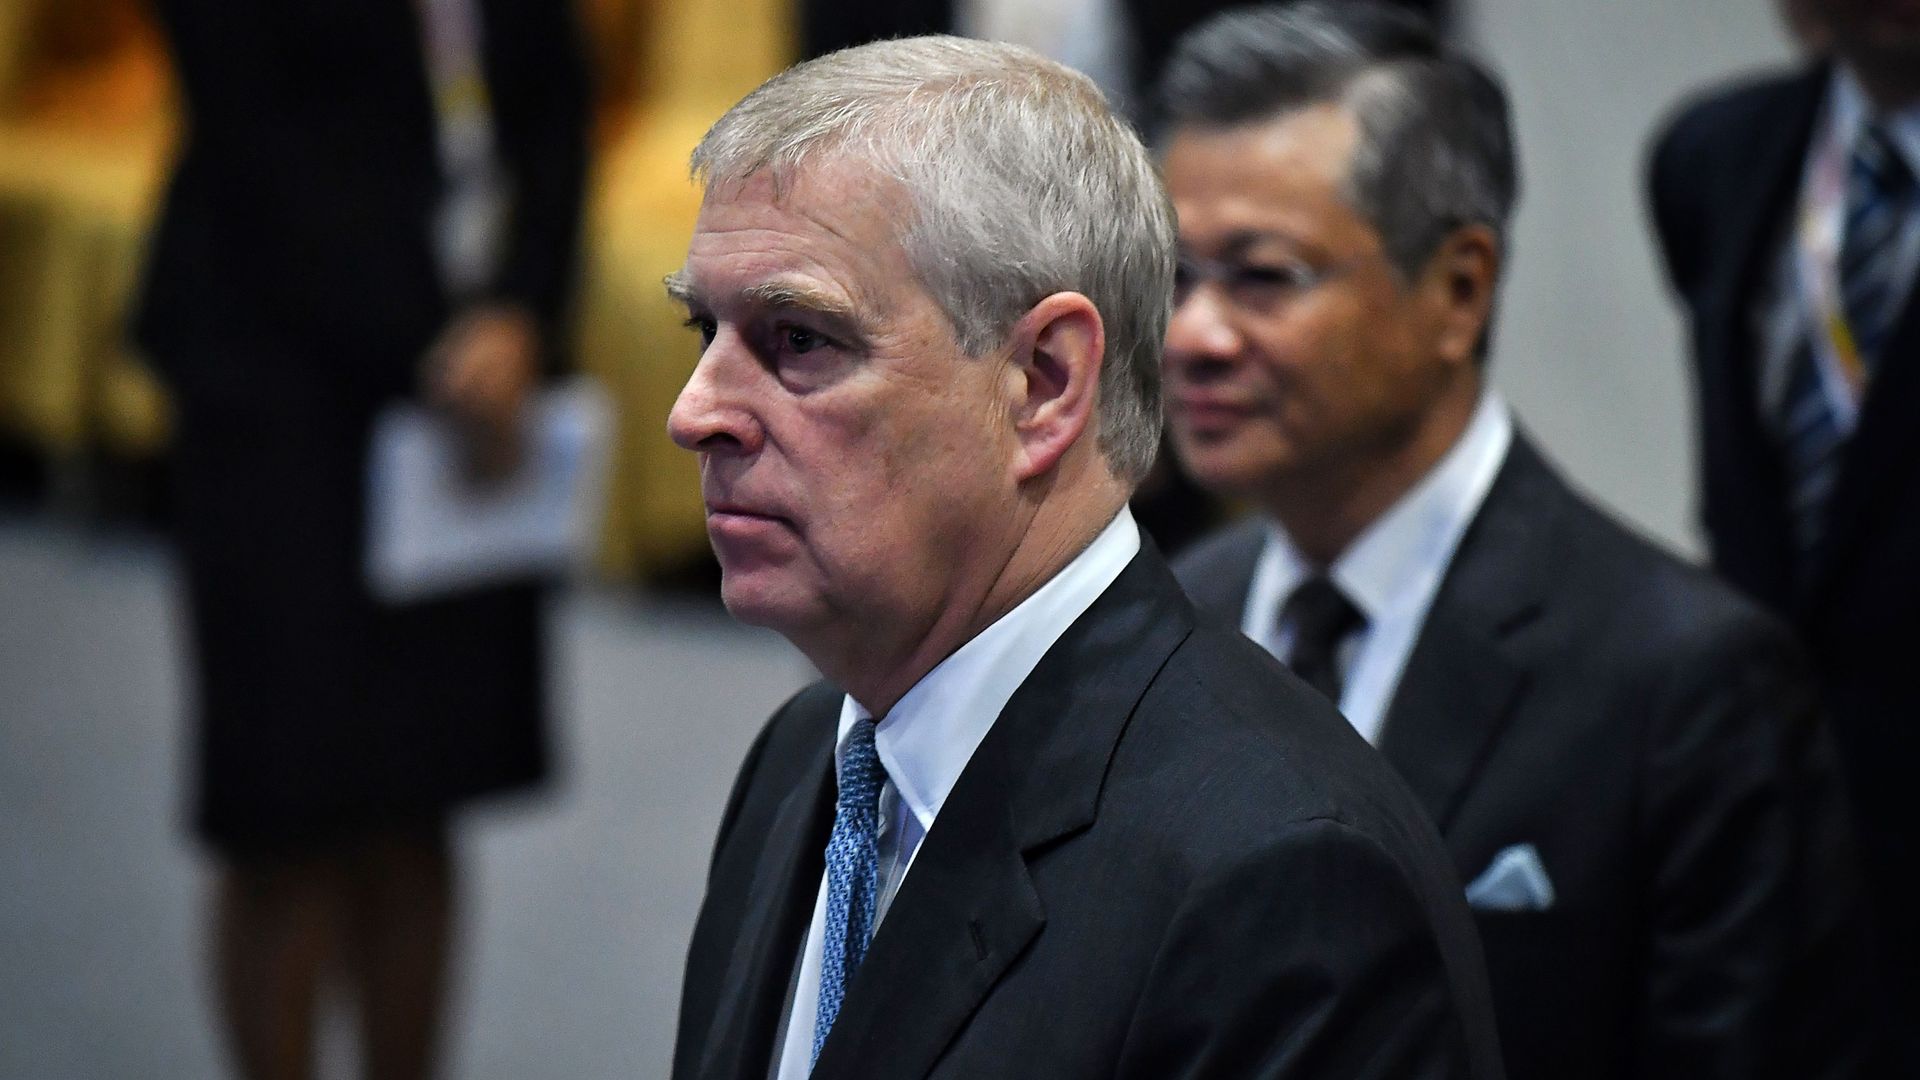 In this image, Prince Andrew stands and walks while wearing a suit.